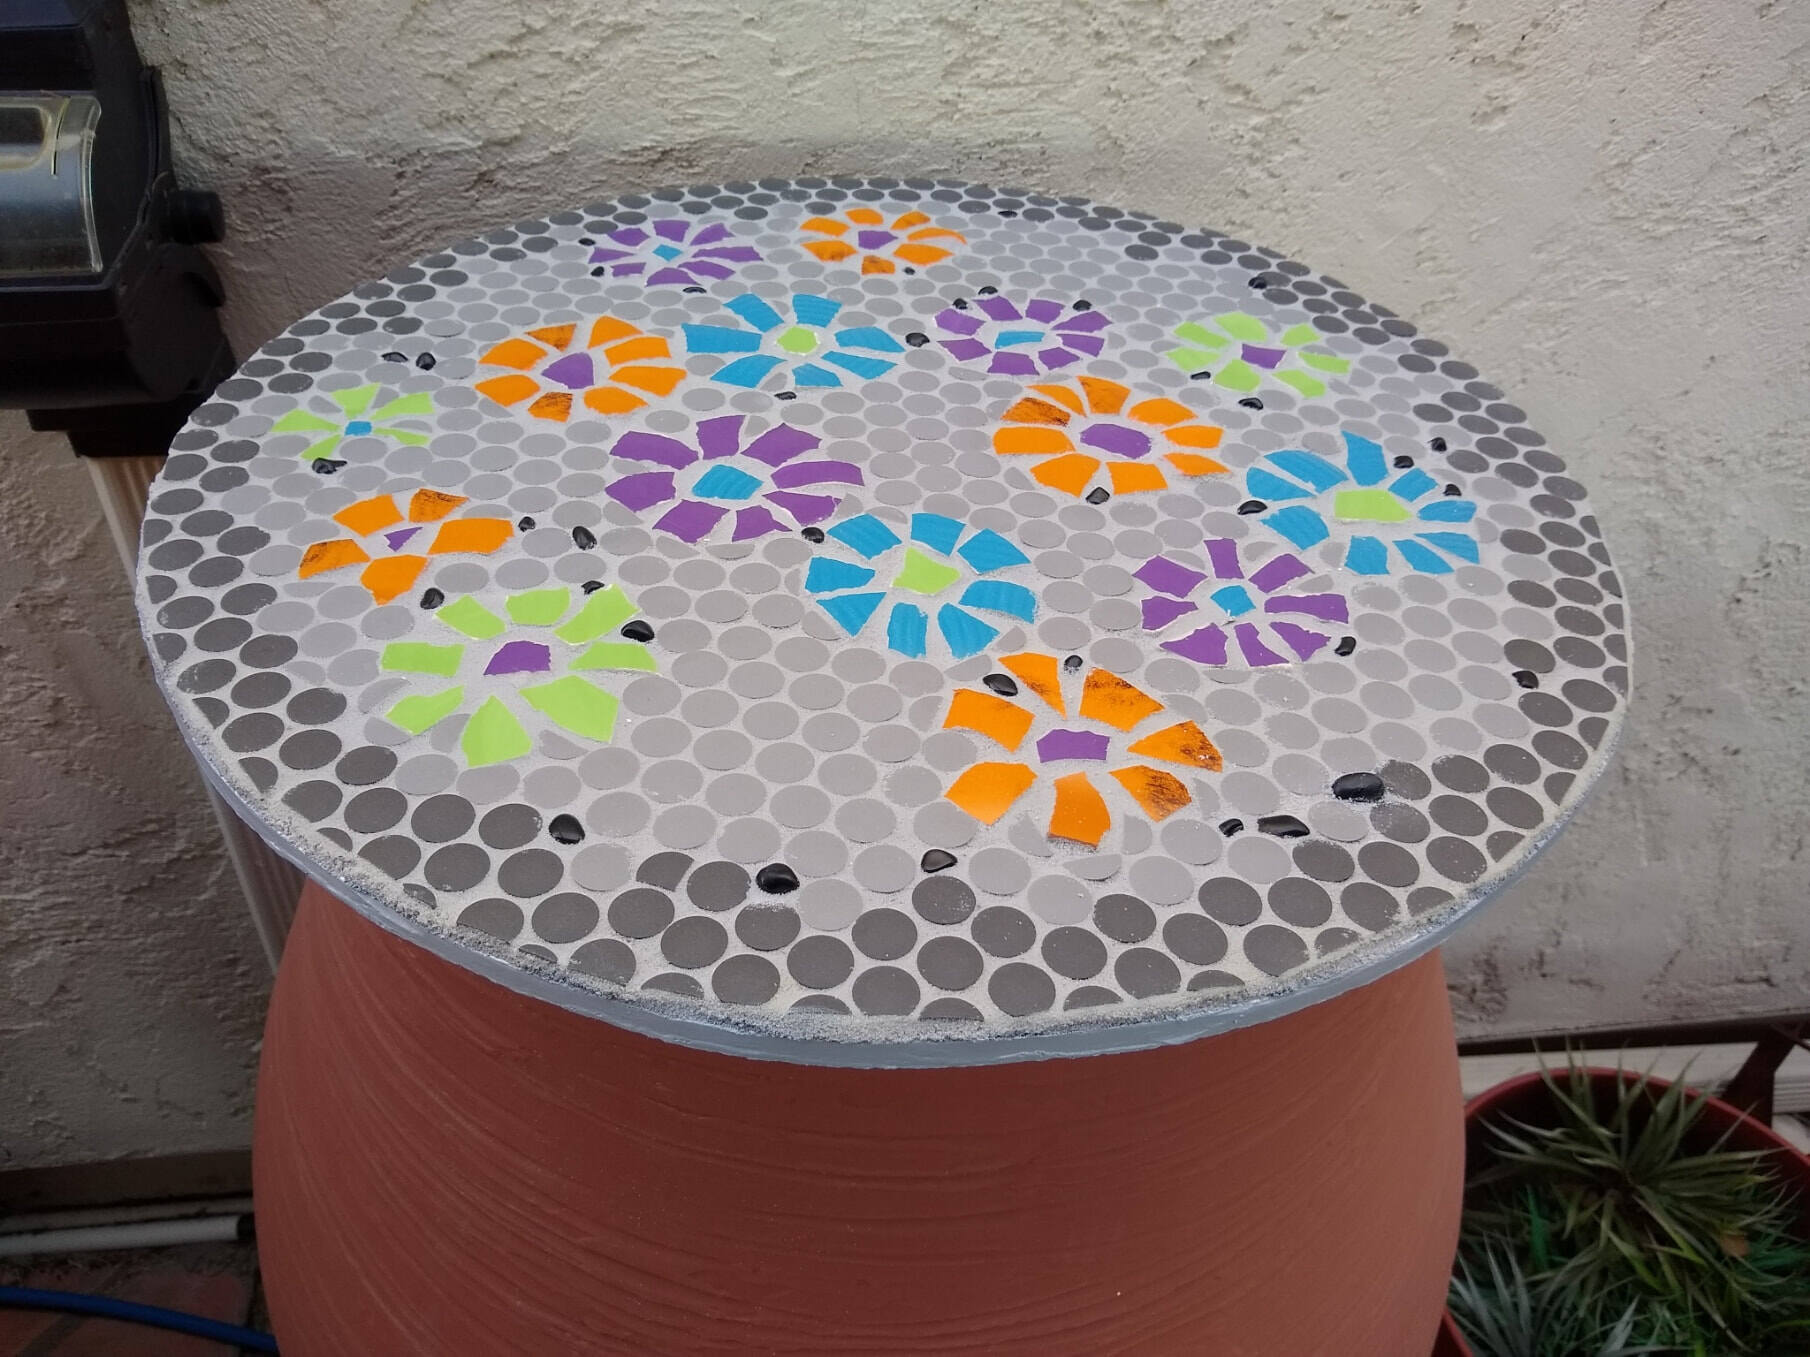 How To Make An Outdoor Mosaic Table Top